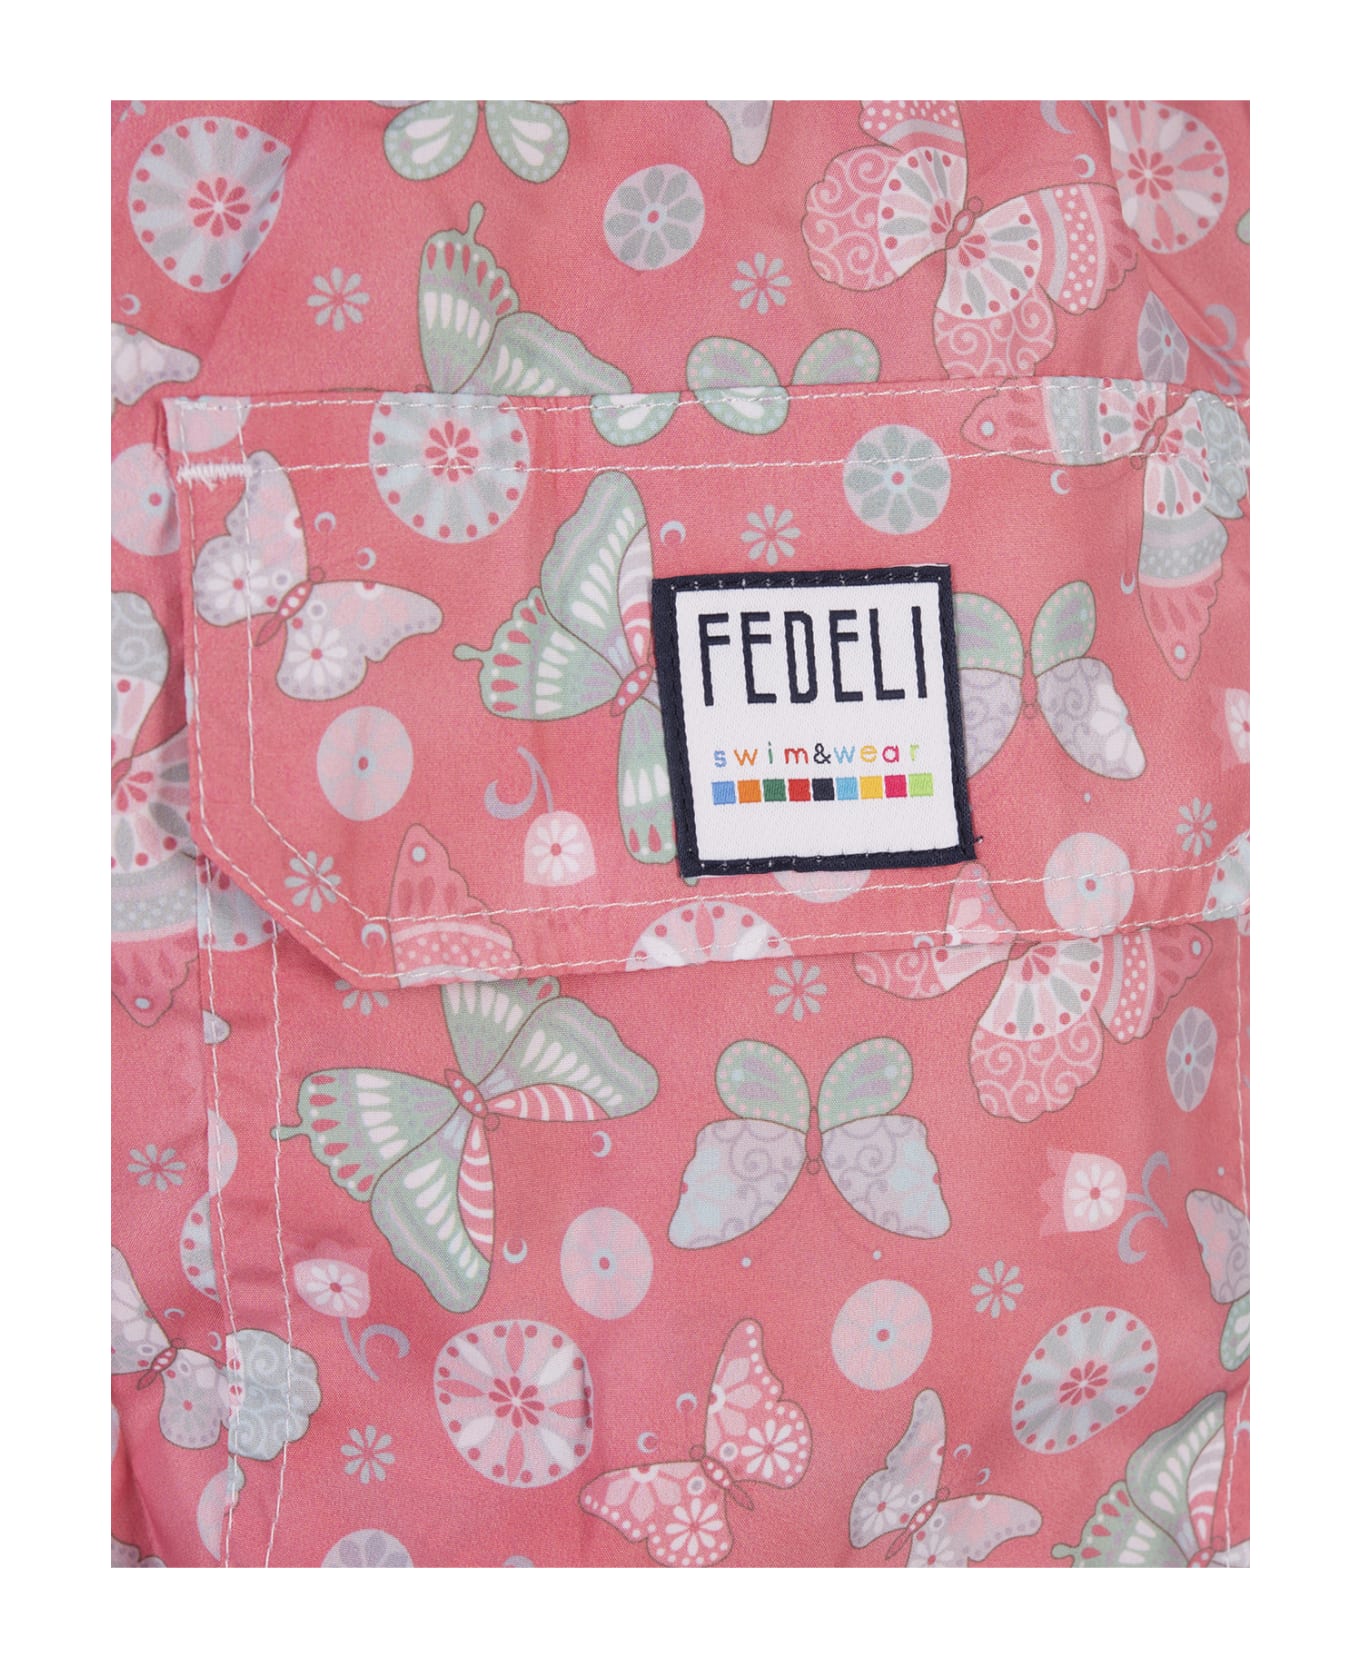 Fedeli Pink Swim Shorts With Butterfly Print - Pink